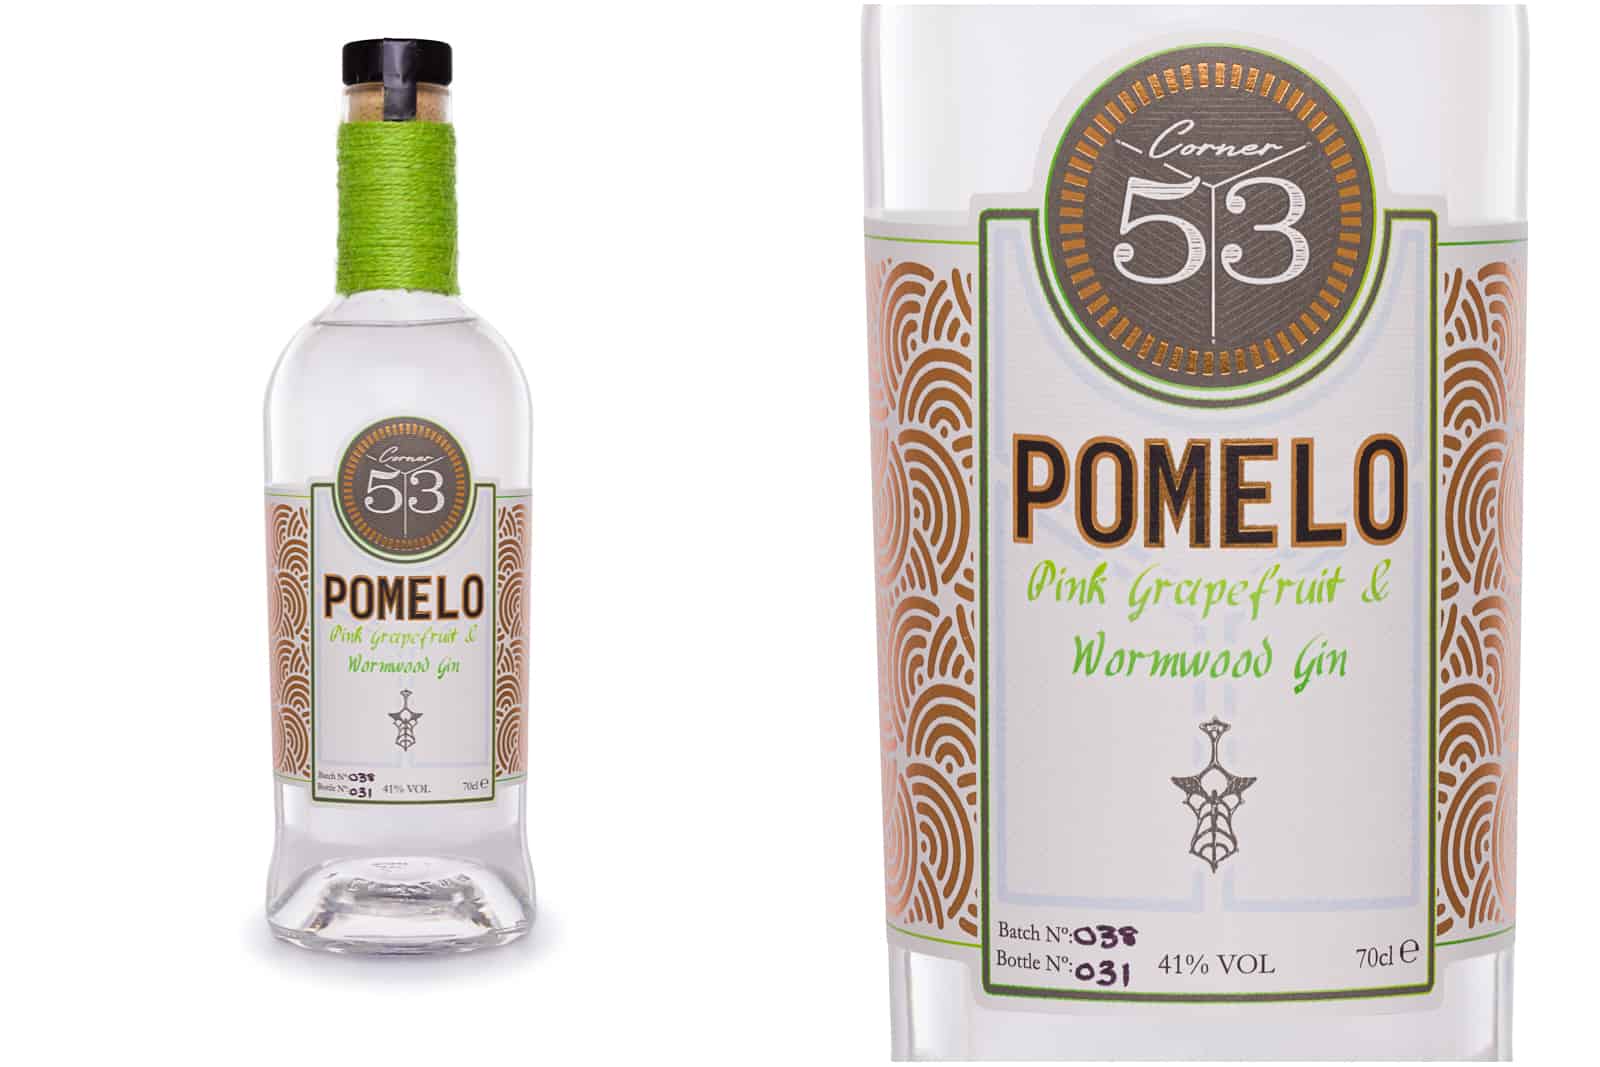 Bottle of Pomelo Gin made by Corner 53 distillery on a white background